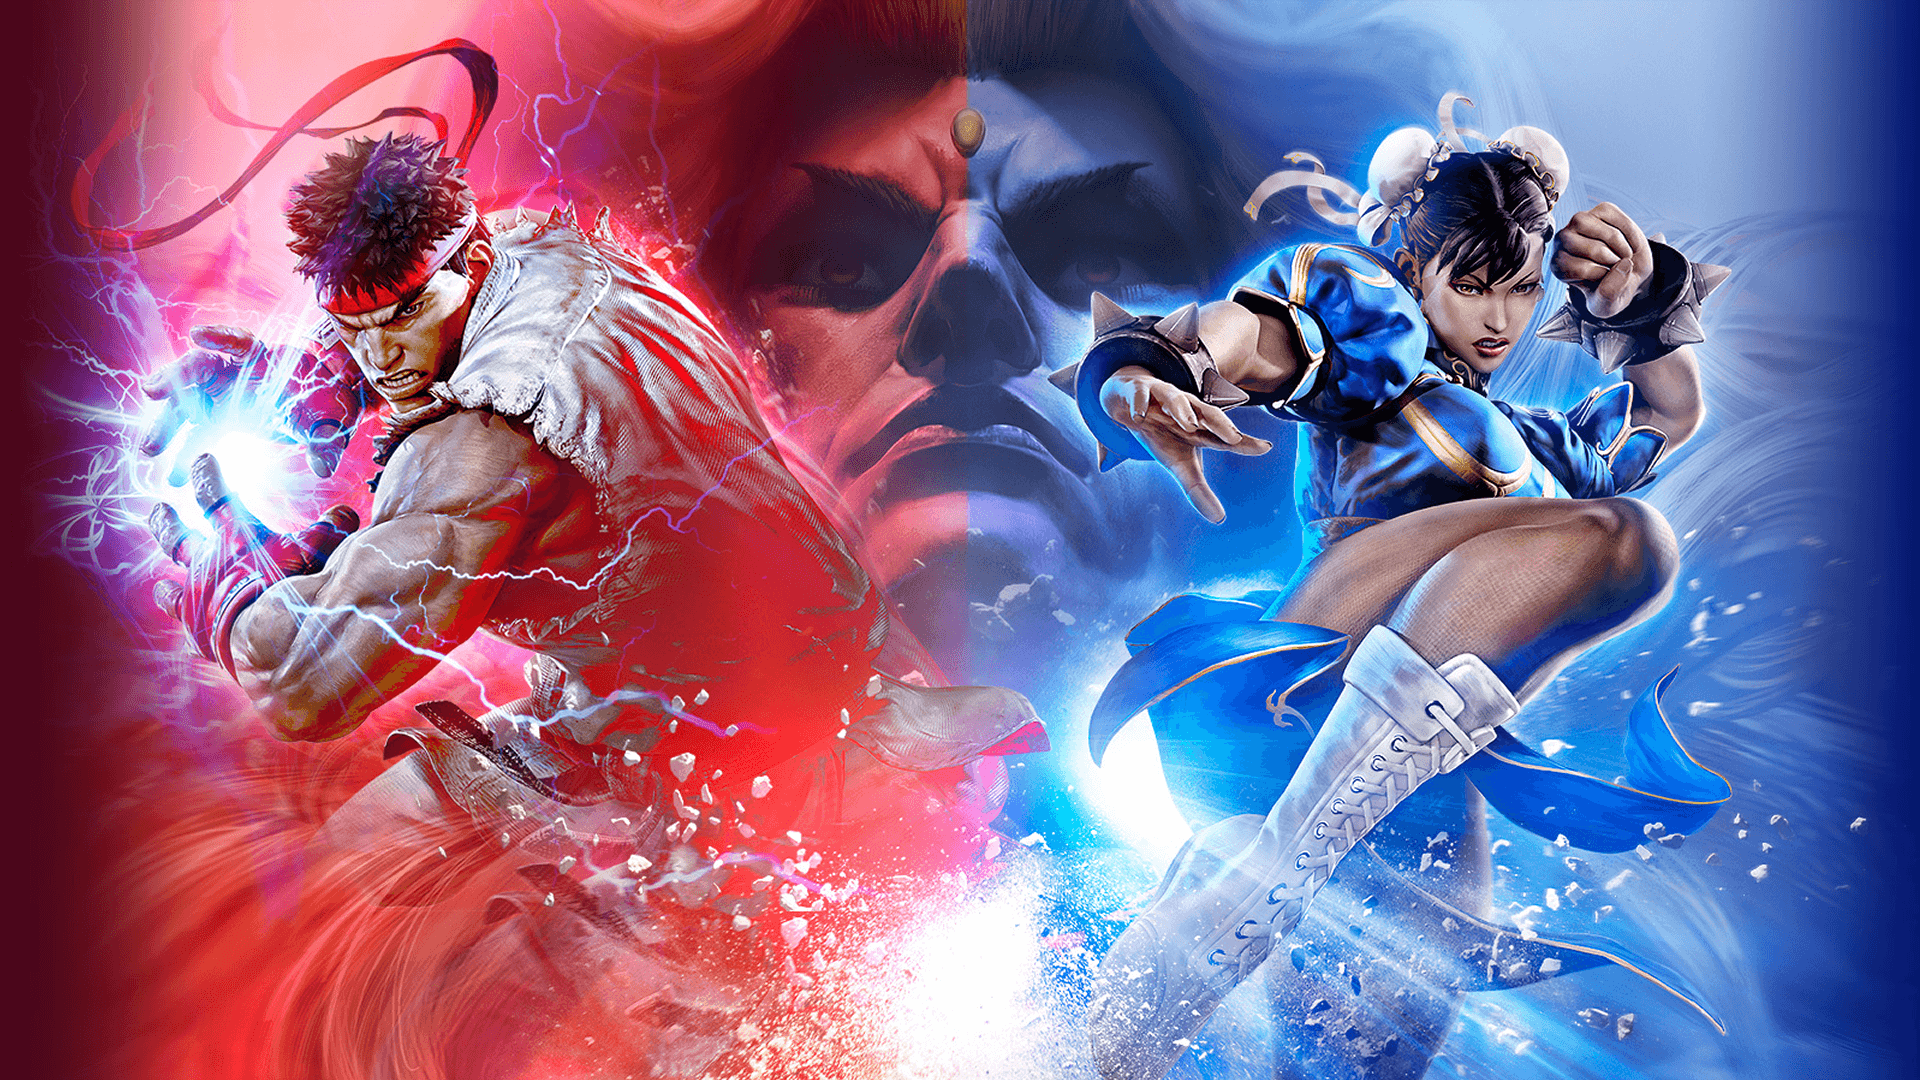 Rumor: Street Fighter V Champion Edition is coming to the Nintendo